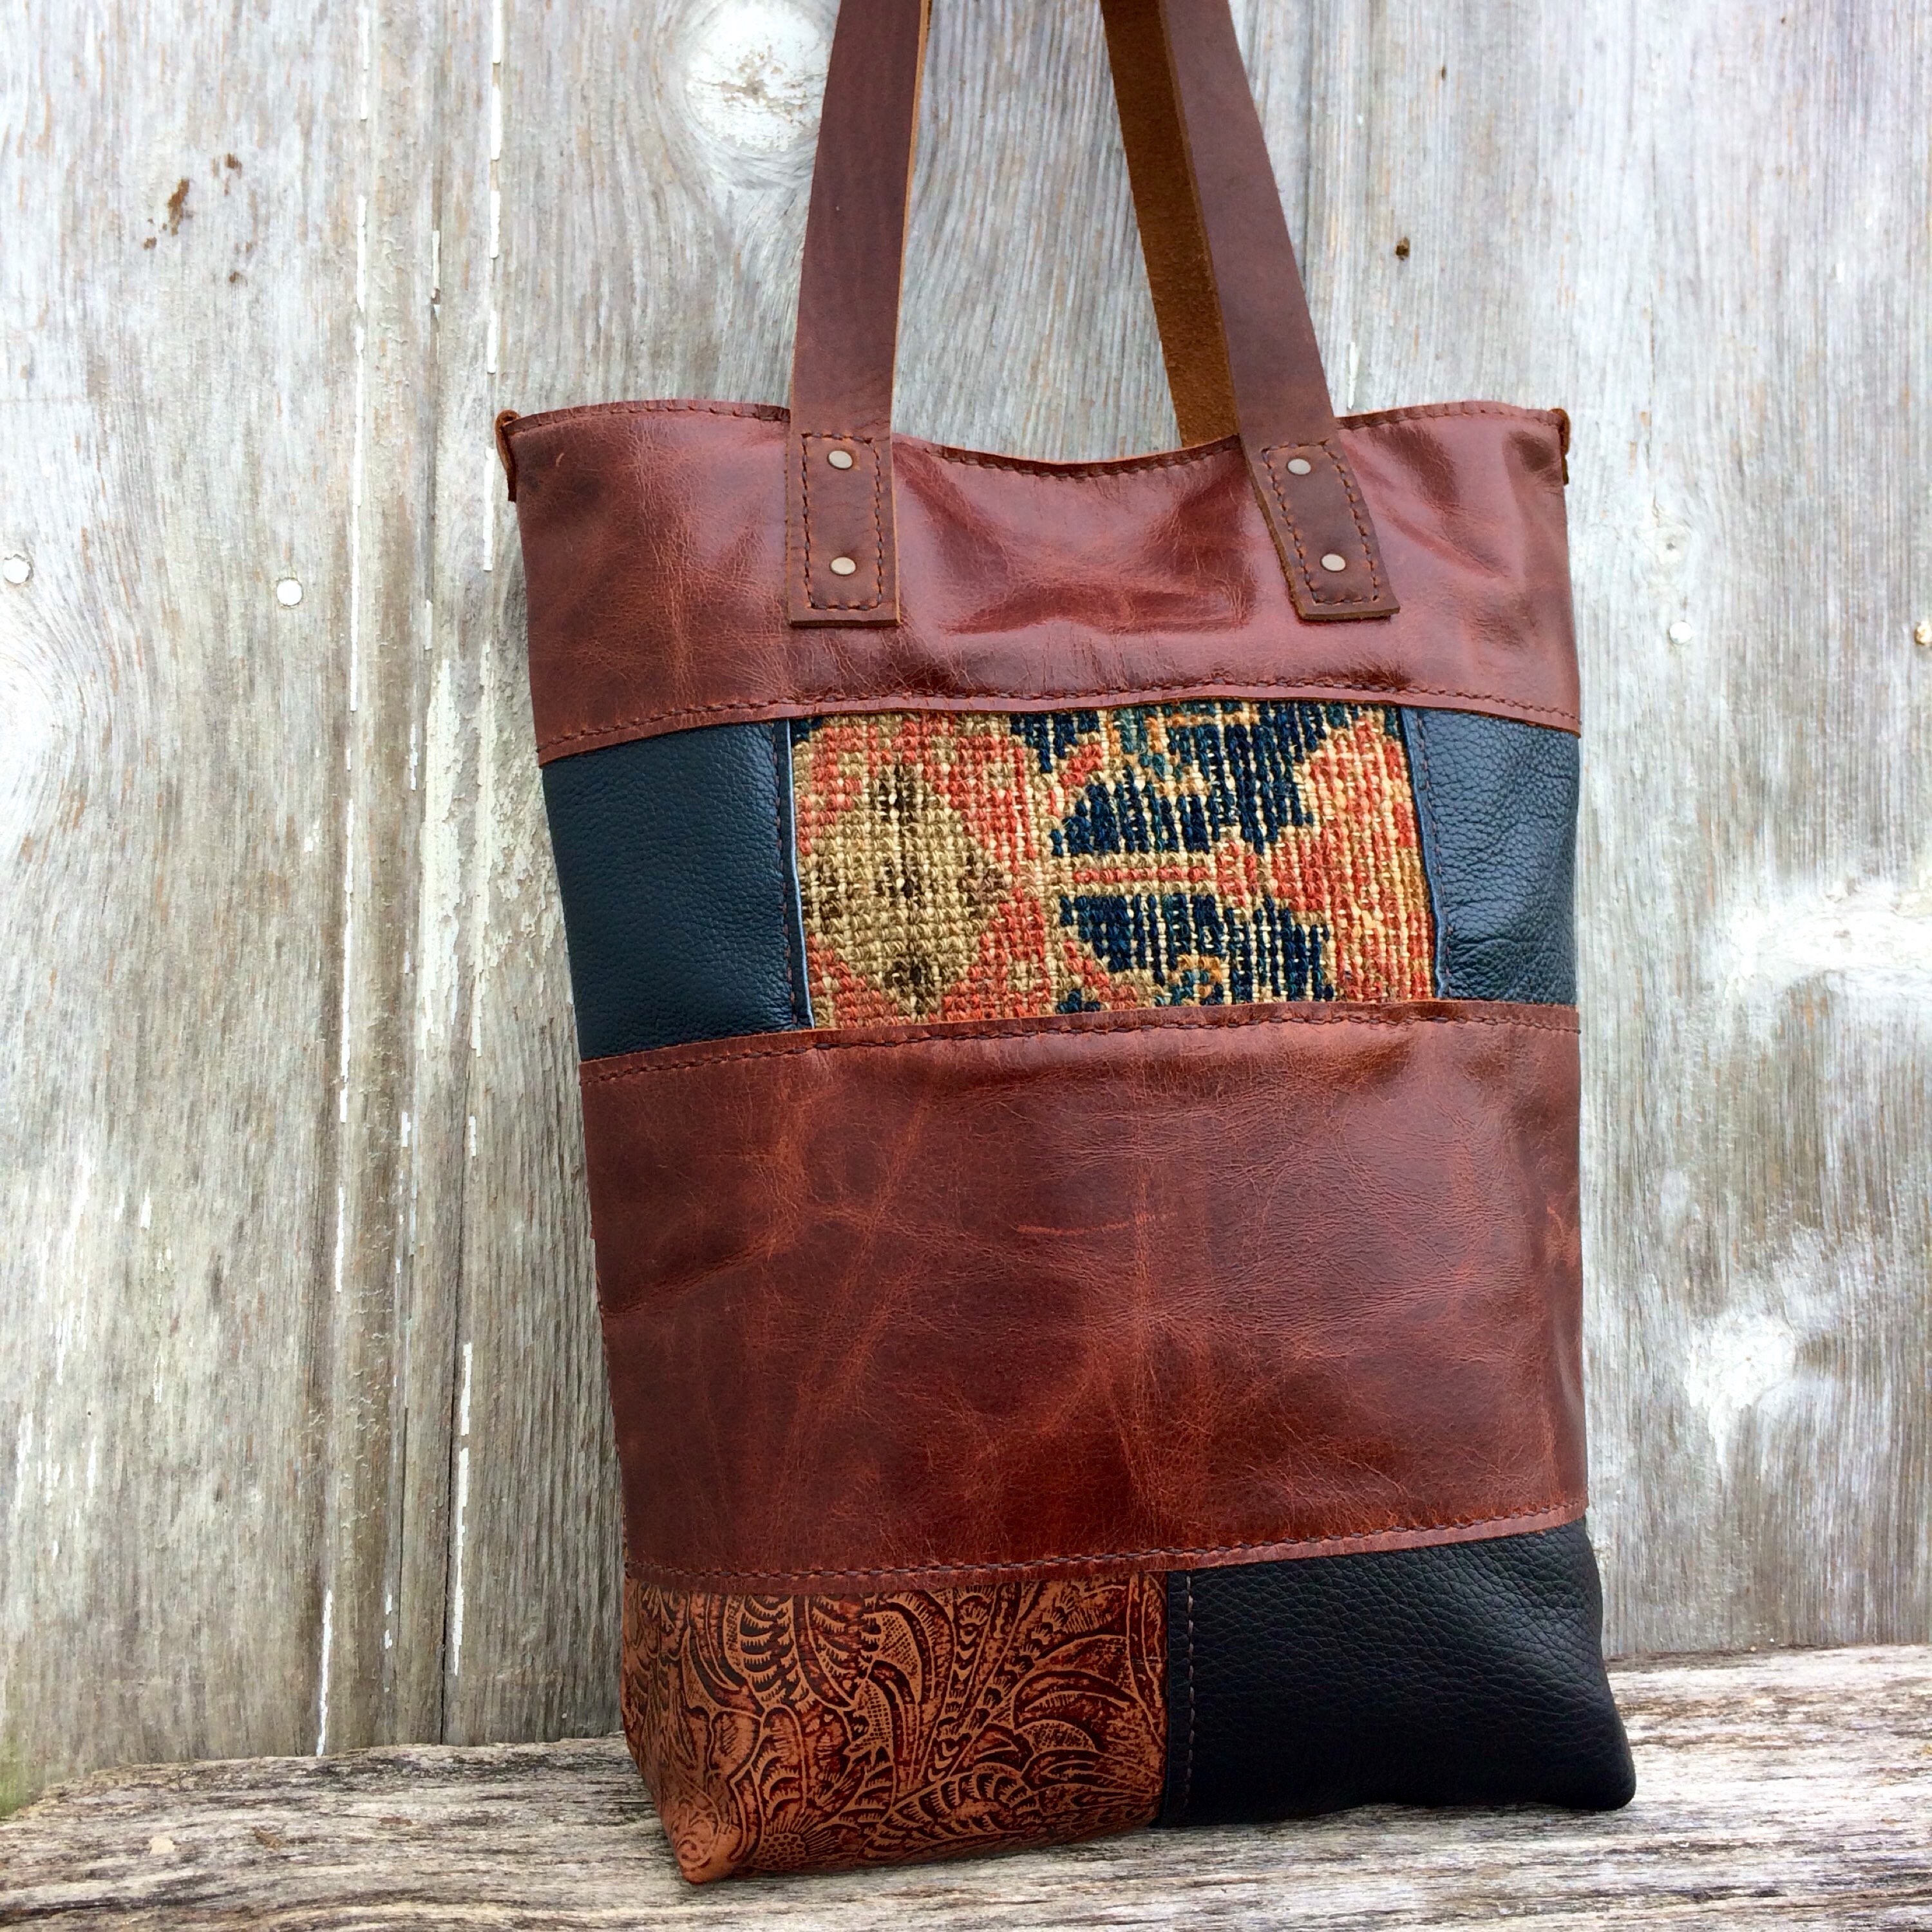 Leather Patchwork Carpetbag Tote in Distressed Chestnut and - Etsy Canada